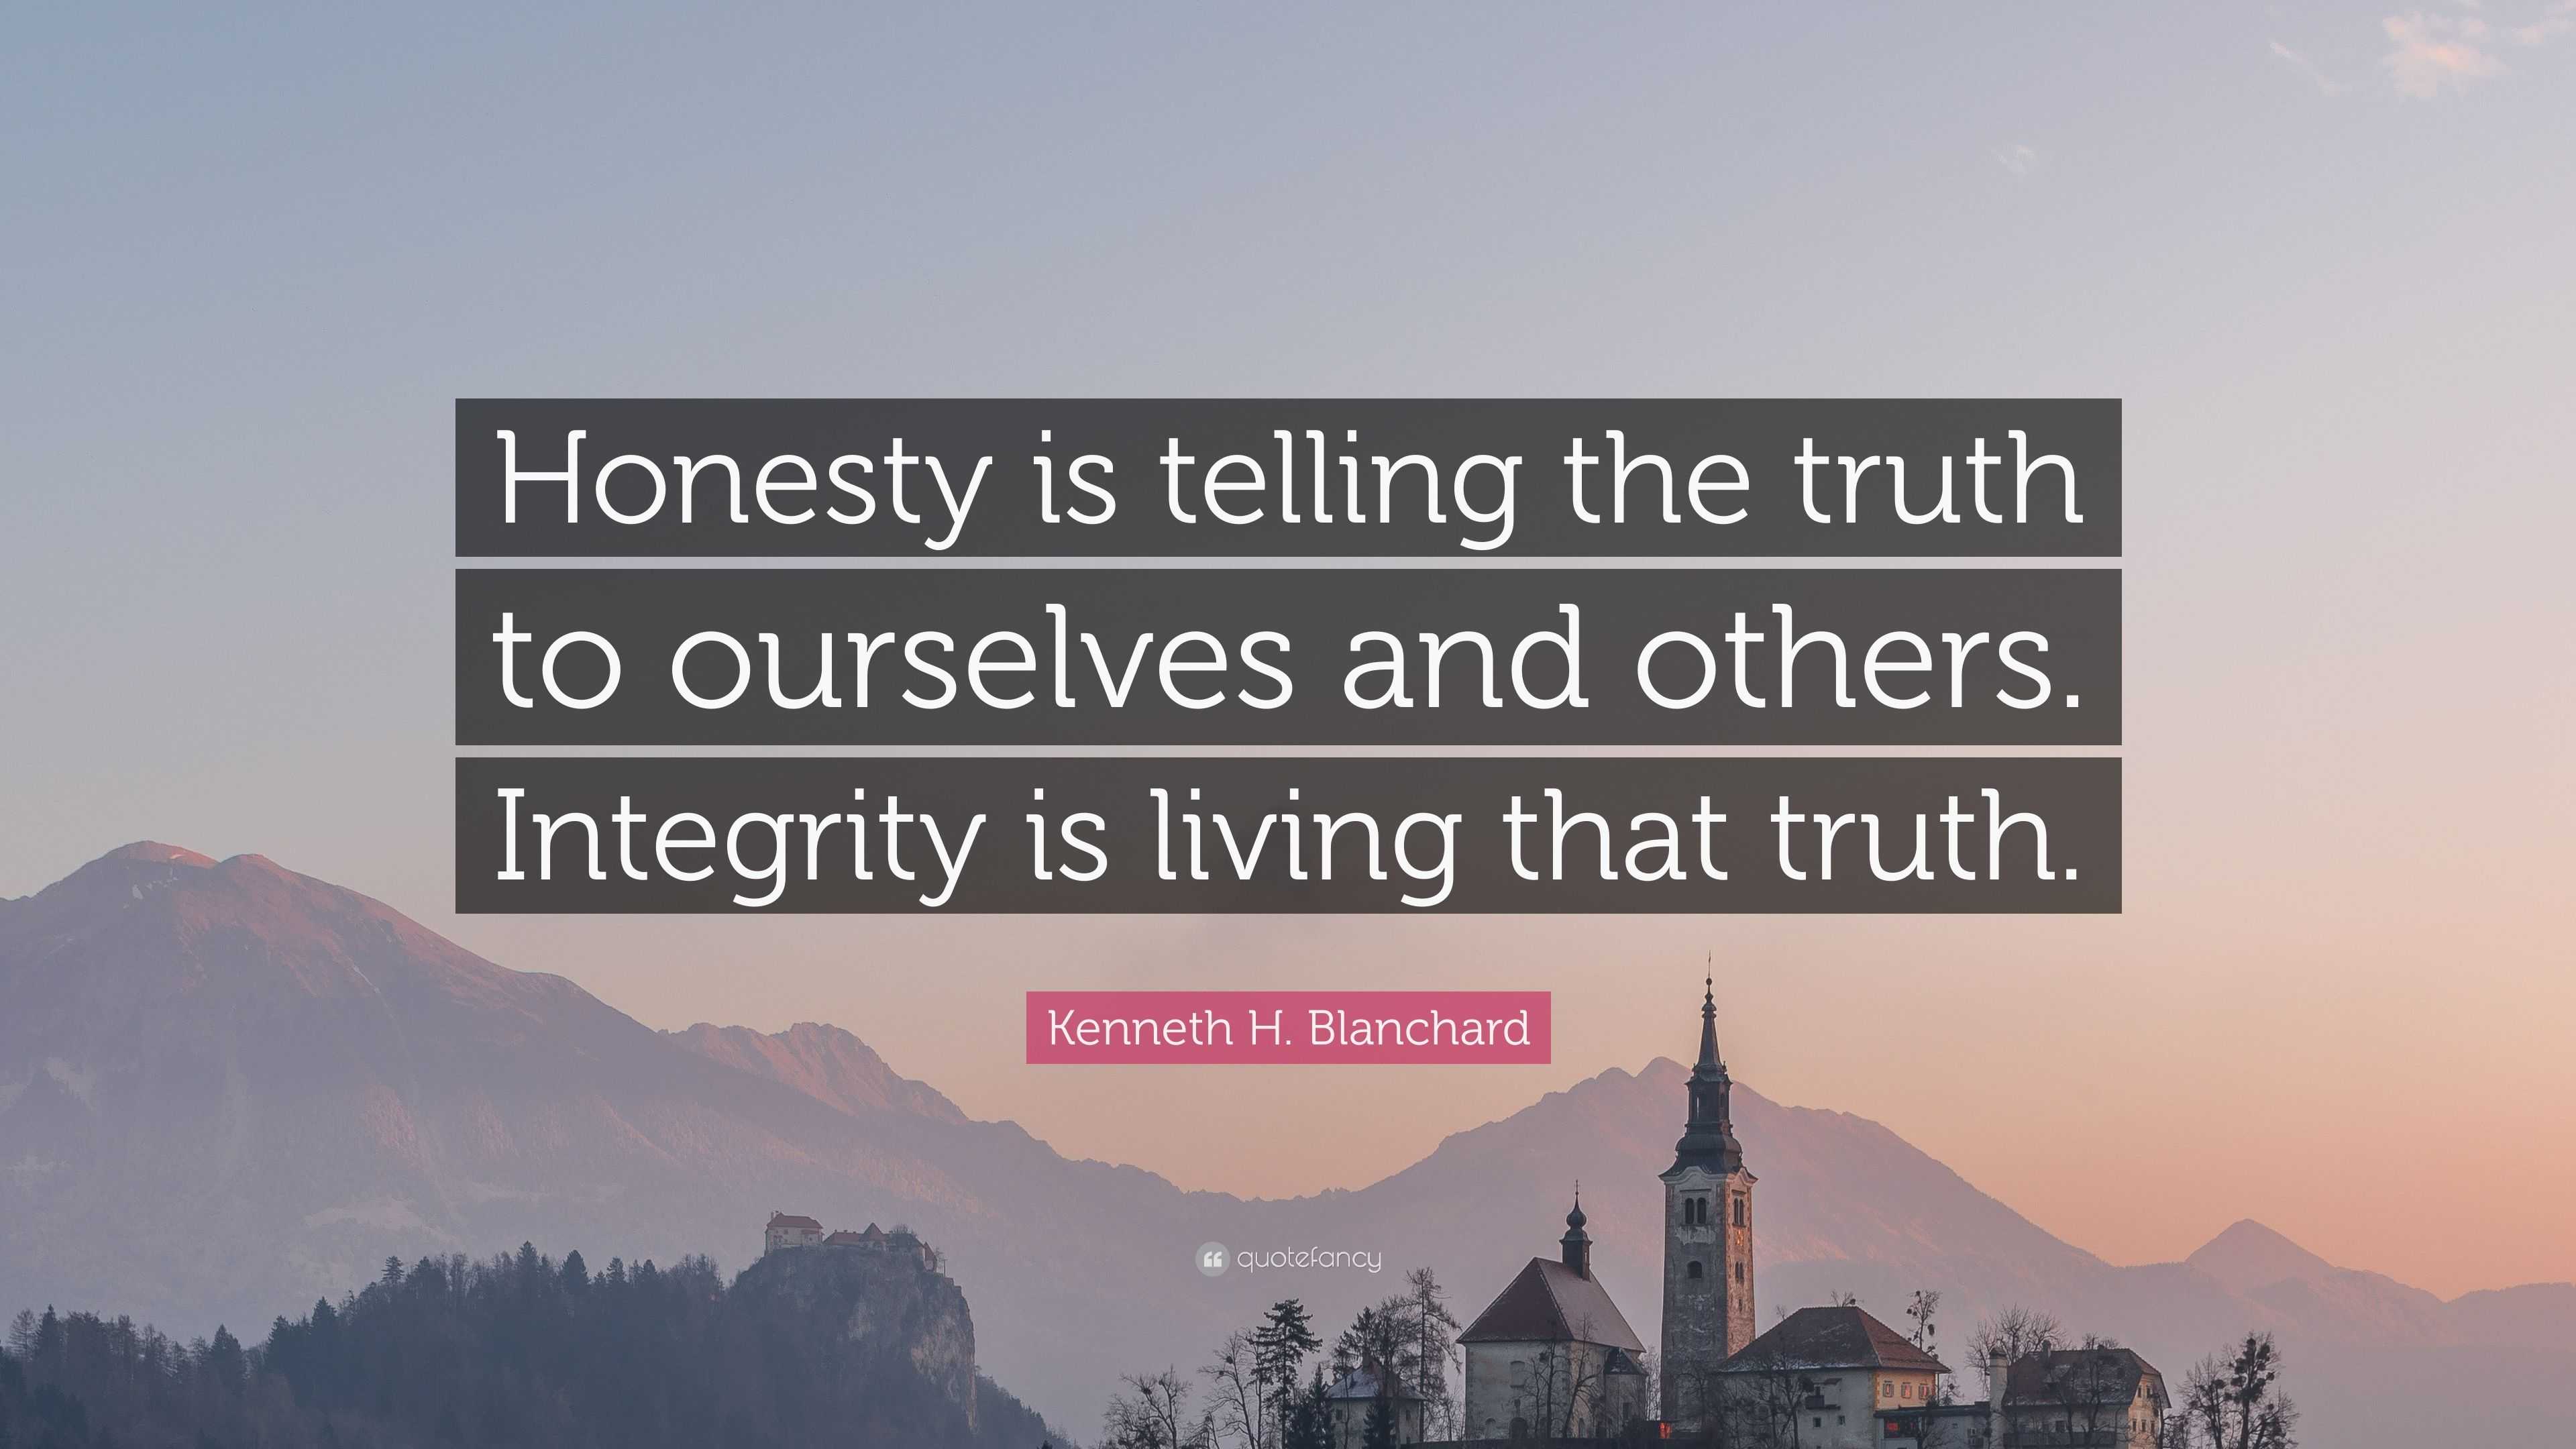 Kenneth H. Blanchard Quote: “Honesty is telling the truth to ourselves